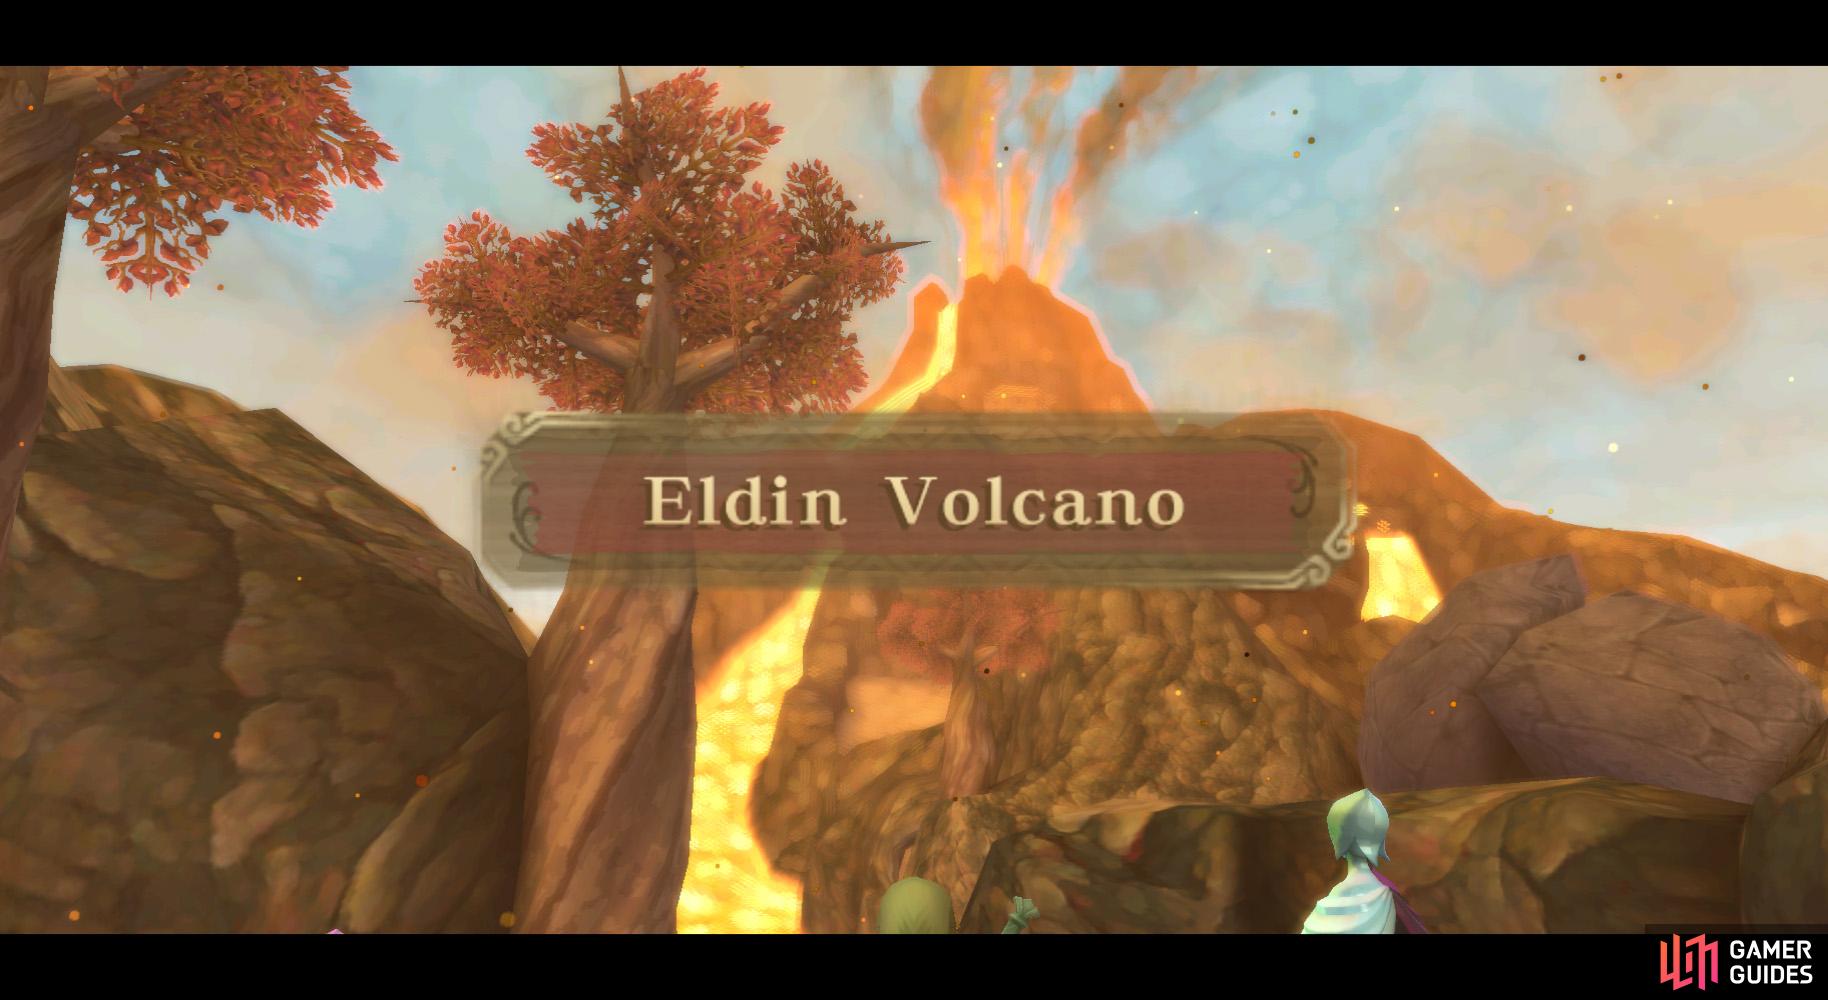 Eldin Volcano is a harsher environment than Faron Woods, but nothing Link cant handle.